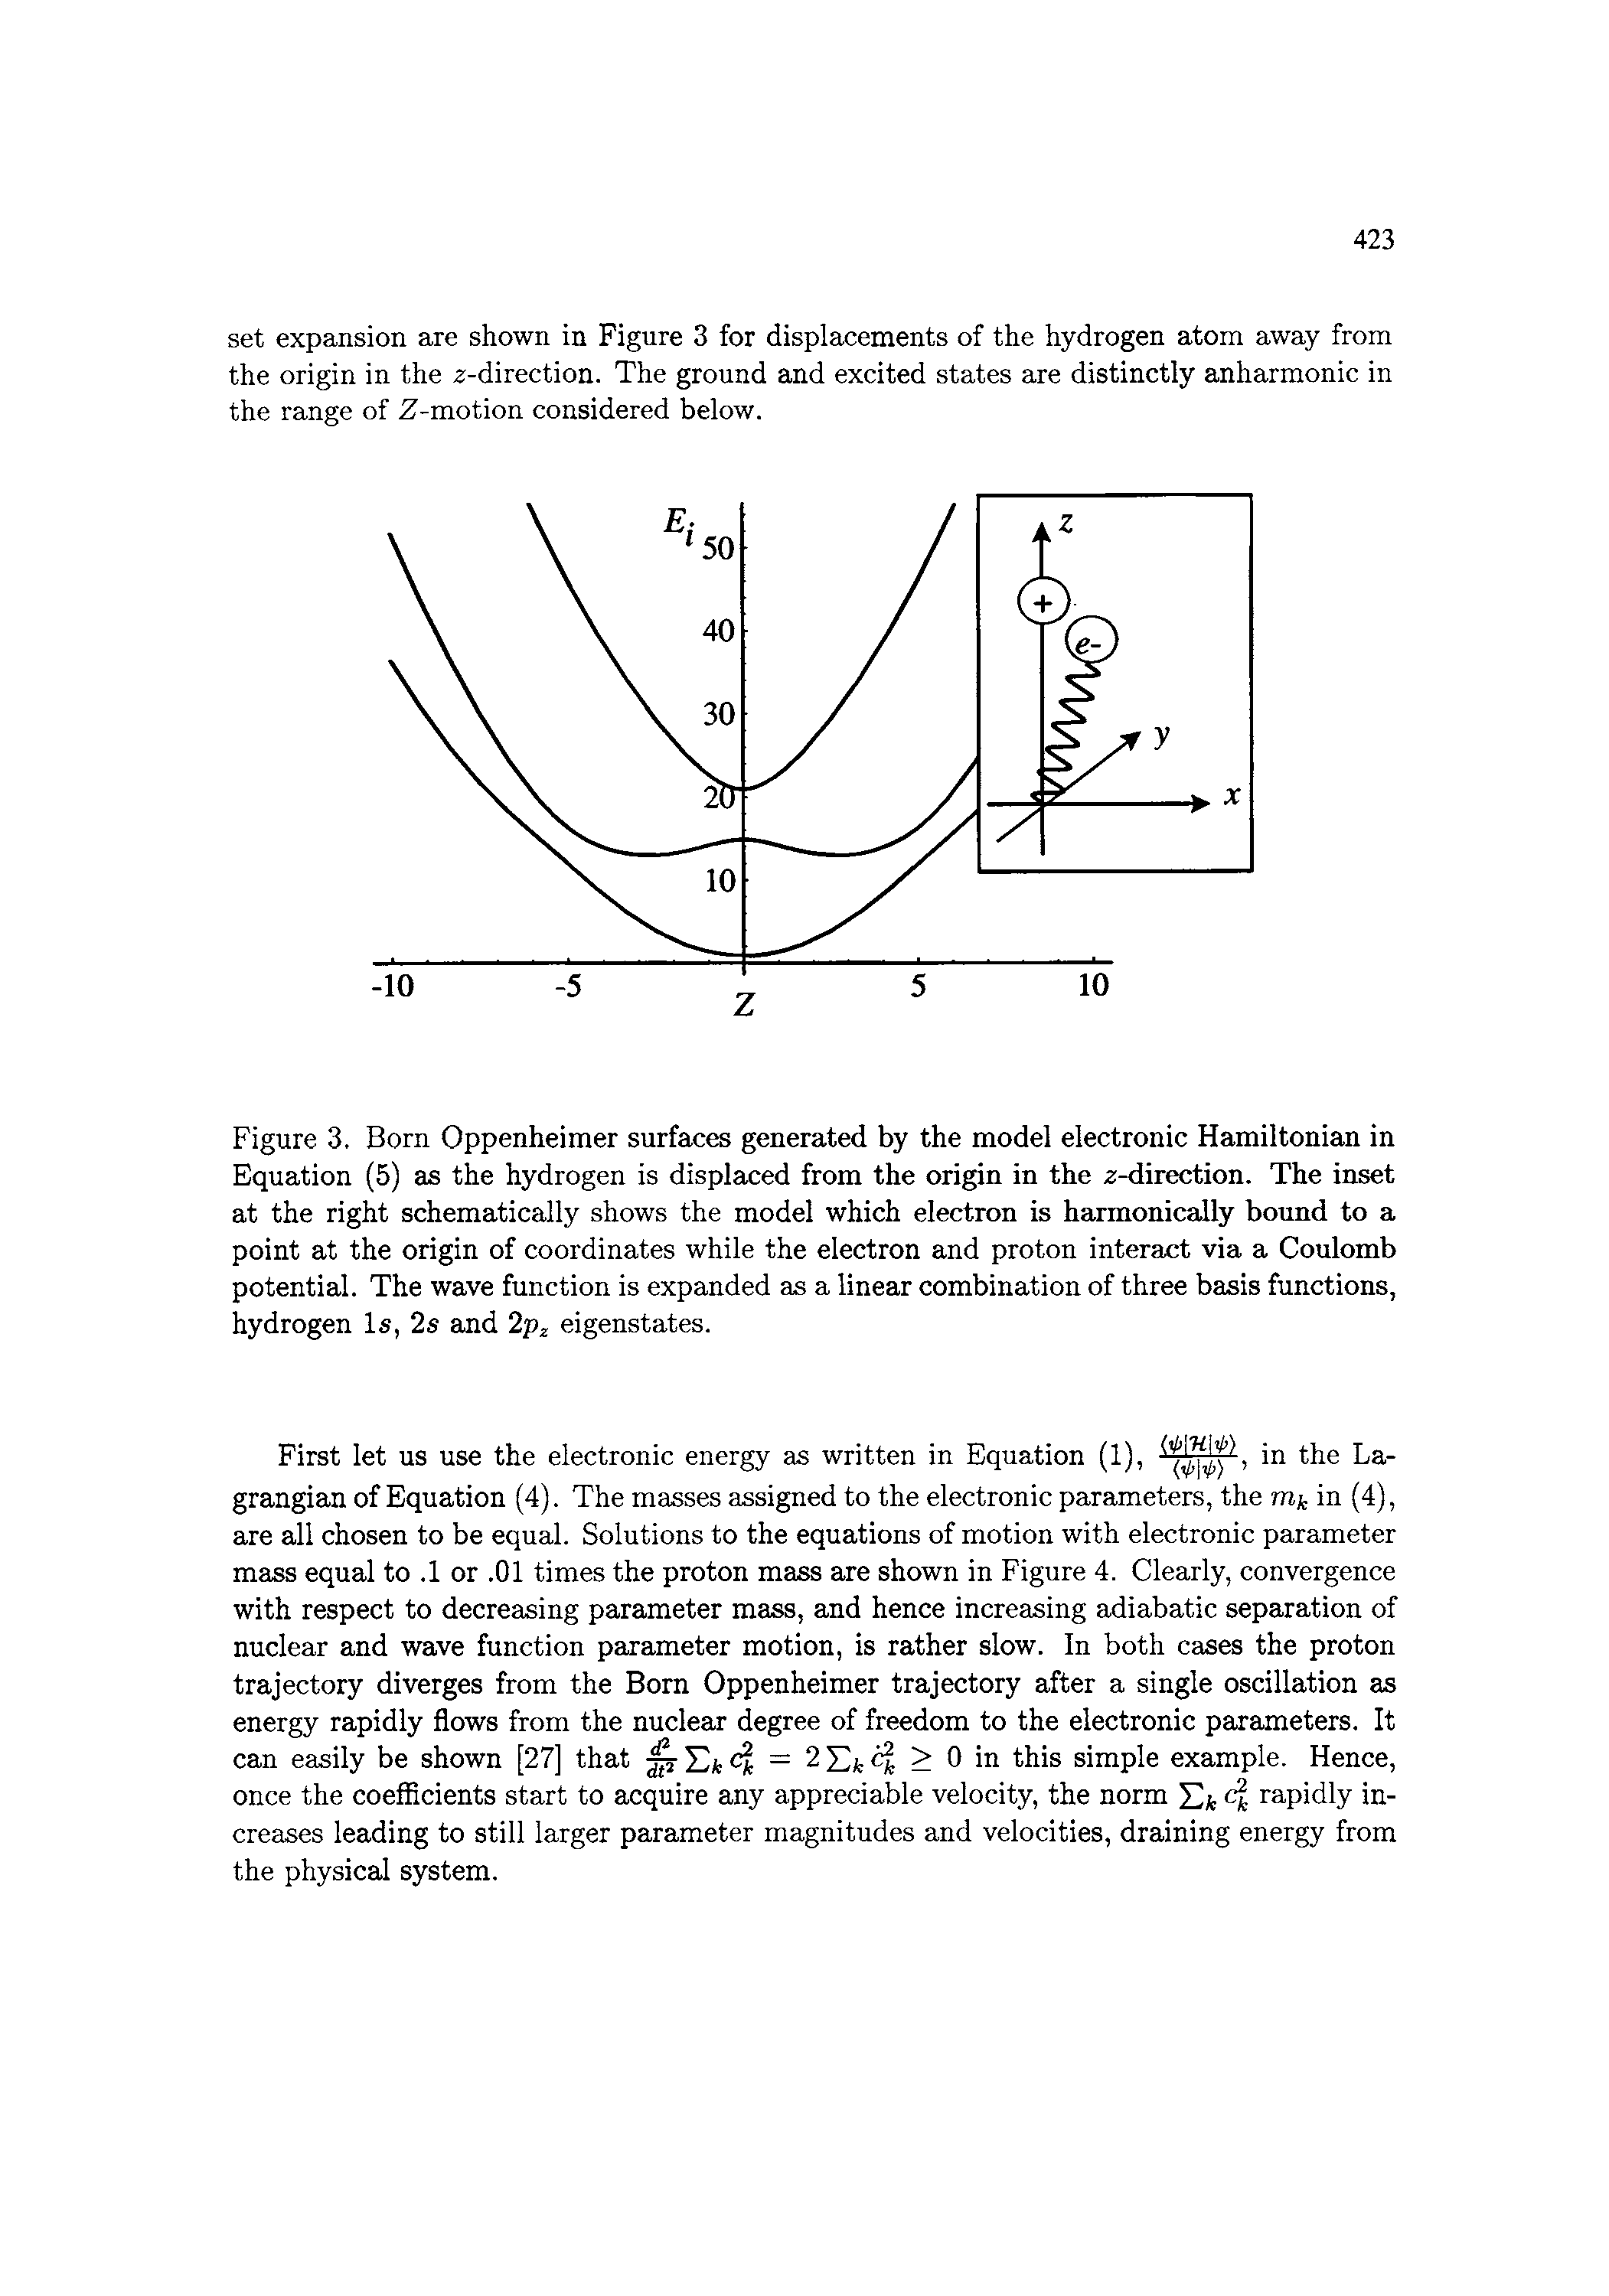 Figure 3. Born Oppenheimer surfaces generated by the model electronic Hamiltonian in Equation (5) as the hydrogen is displaced from the origin in the -direction. The inset at the right schematically shows the model which electron is harmonically bound to a point at the origin of coordinates while the electron and proton interact via a Coulomb potential. The wave function is expanded as a linear combination of three basis functions, hydrogen Is, 2s and 2pz eigenstates.